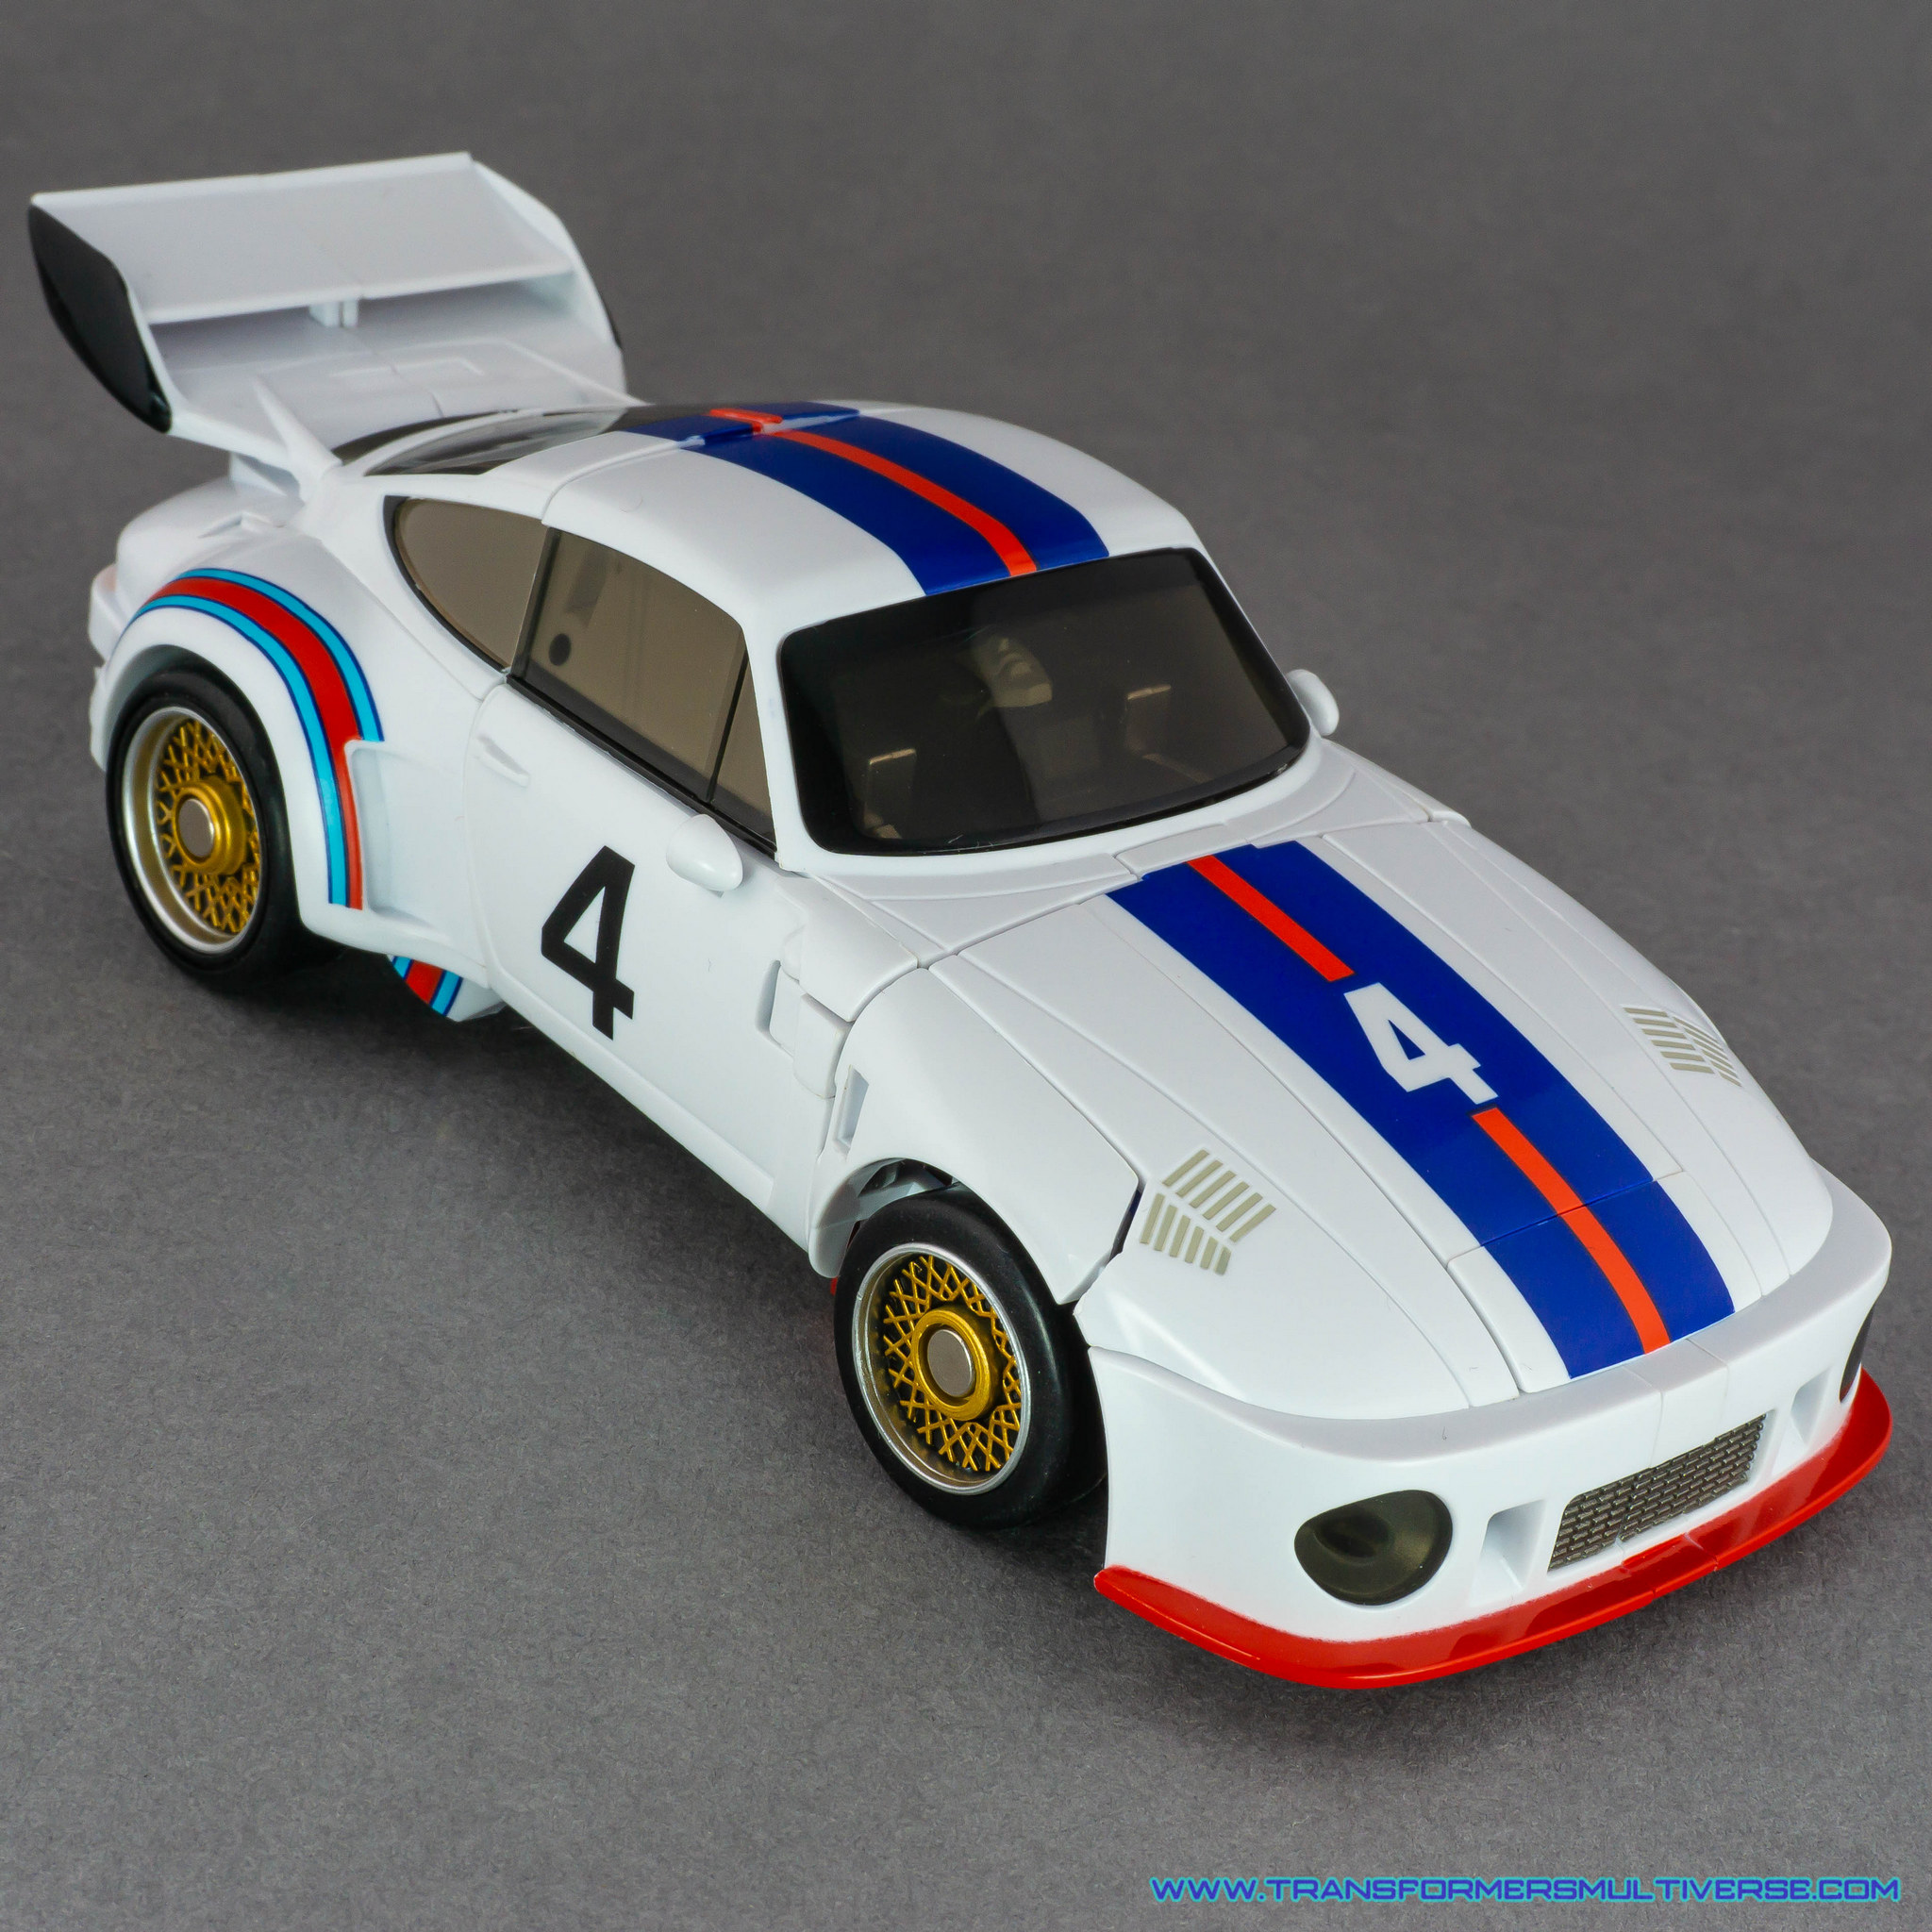 Third Party (Unofficial) Transformers Jazz  Martini Porsche 935 Turbo mode​ alternate angle